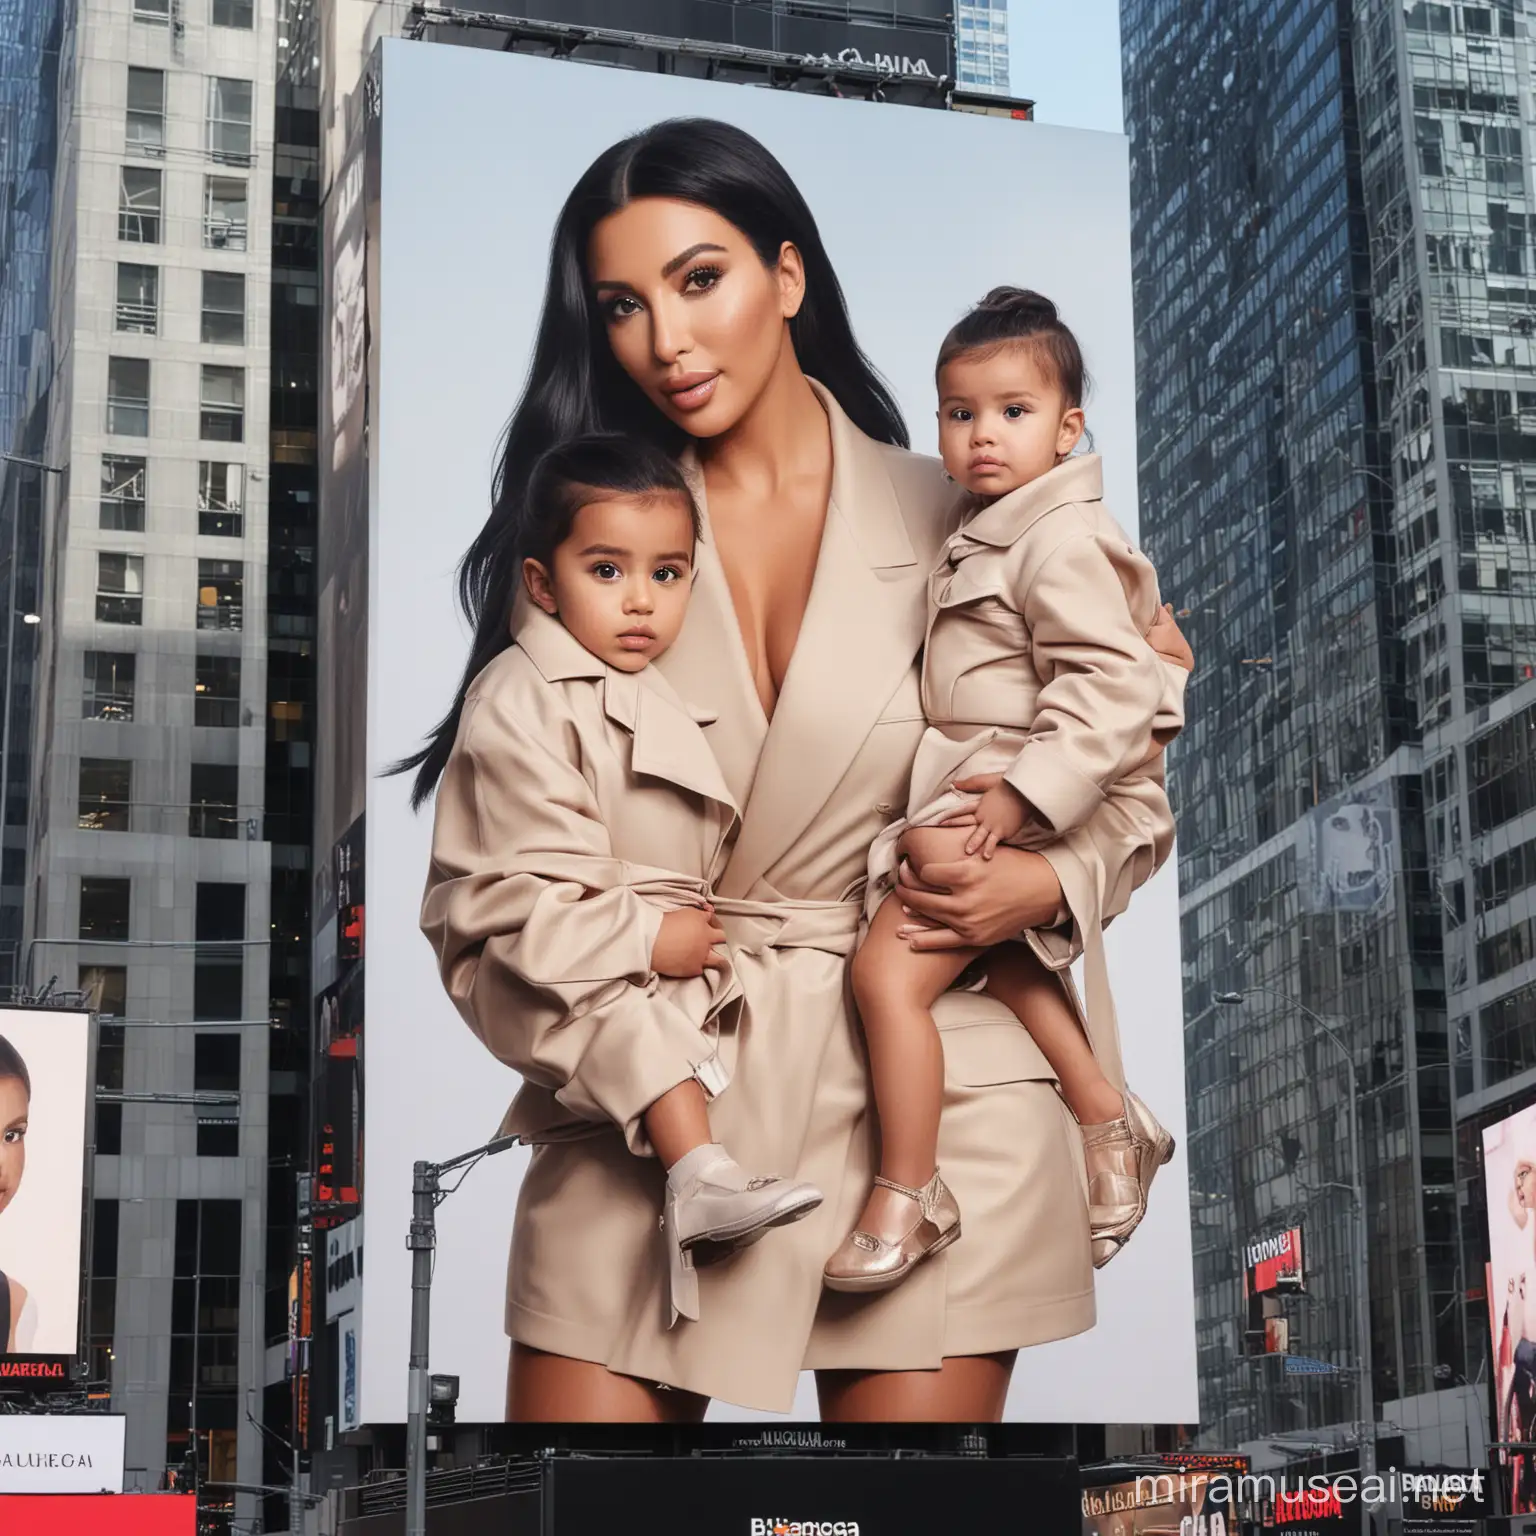 Create an image featuring Kim Kardashian and her daughter, both dressed in Balenciaga outfits, on a billboard in Times Square. Ensure that the clothing reflects the brand's distinctive style while being suitable for a warm and modern family atmosphere. Showcase the special bond between mother and daughter in this elegant representation of fashion and motherhood.